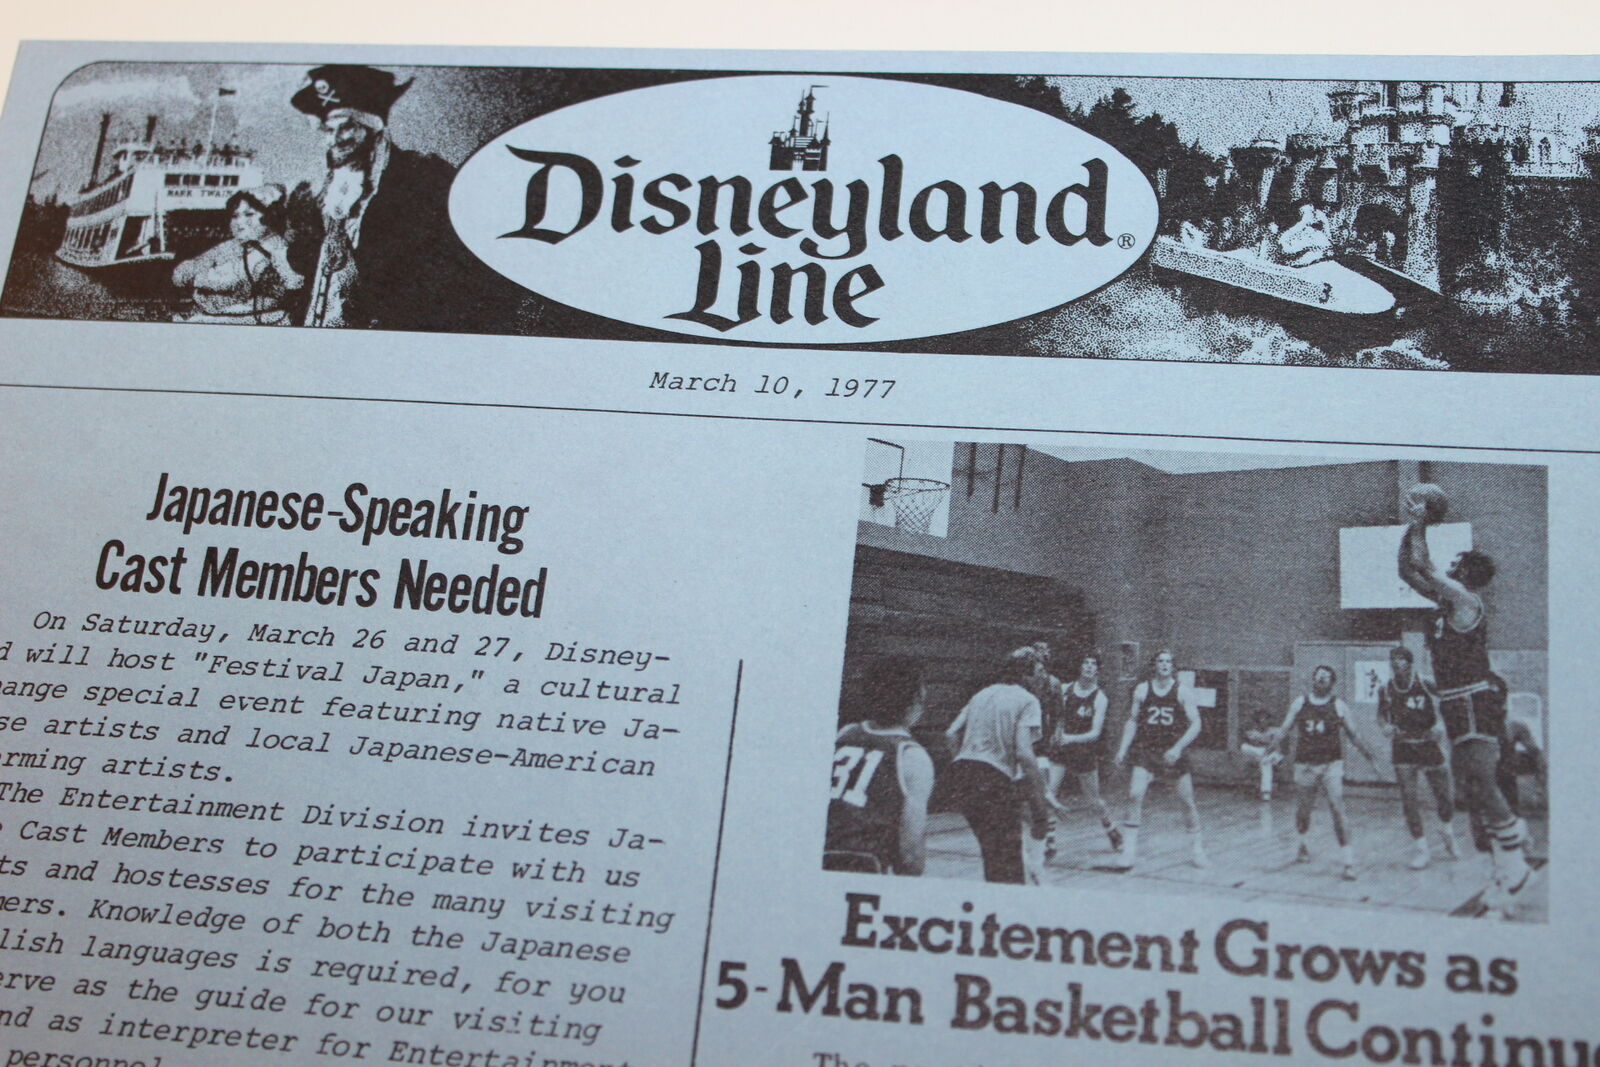 Disneyland Line 1977 Attraction Refurb + Costumed Characters + Space Mountain